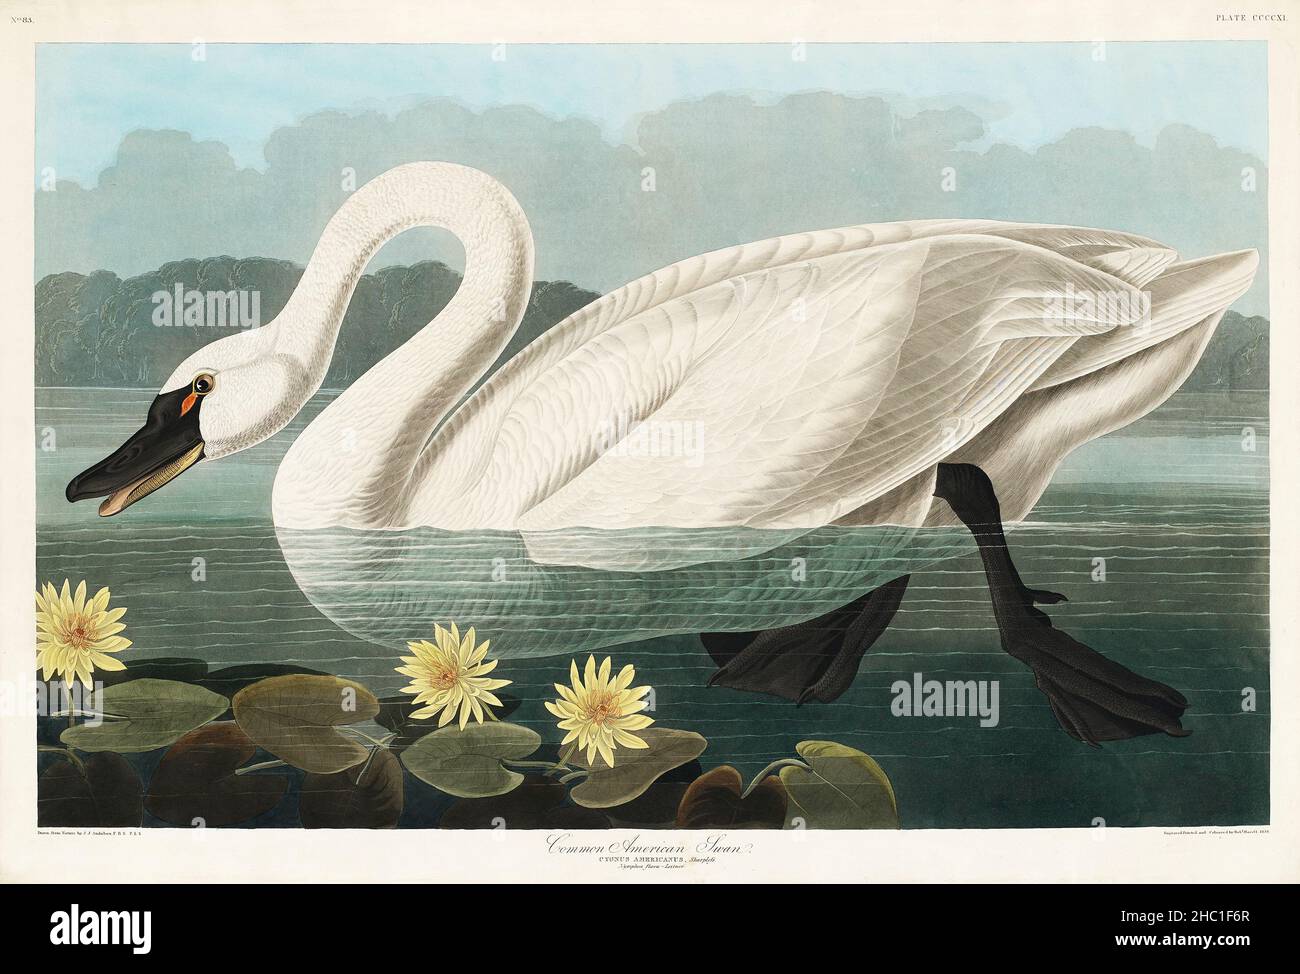 Common American Swan from Birds of America (1827) by John James Audubon (1785-1851) etched by Robert Havell (1793-1878). Stock Photo